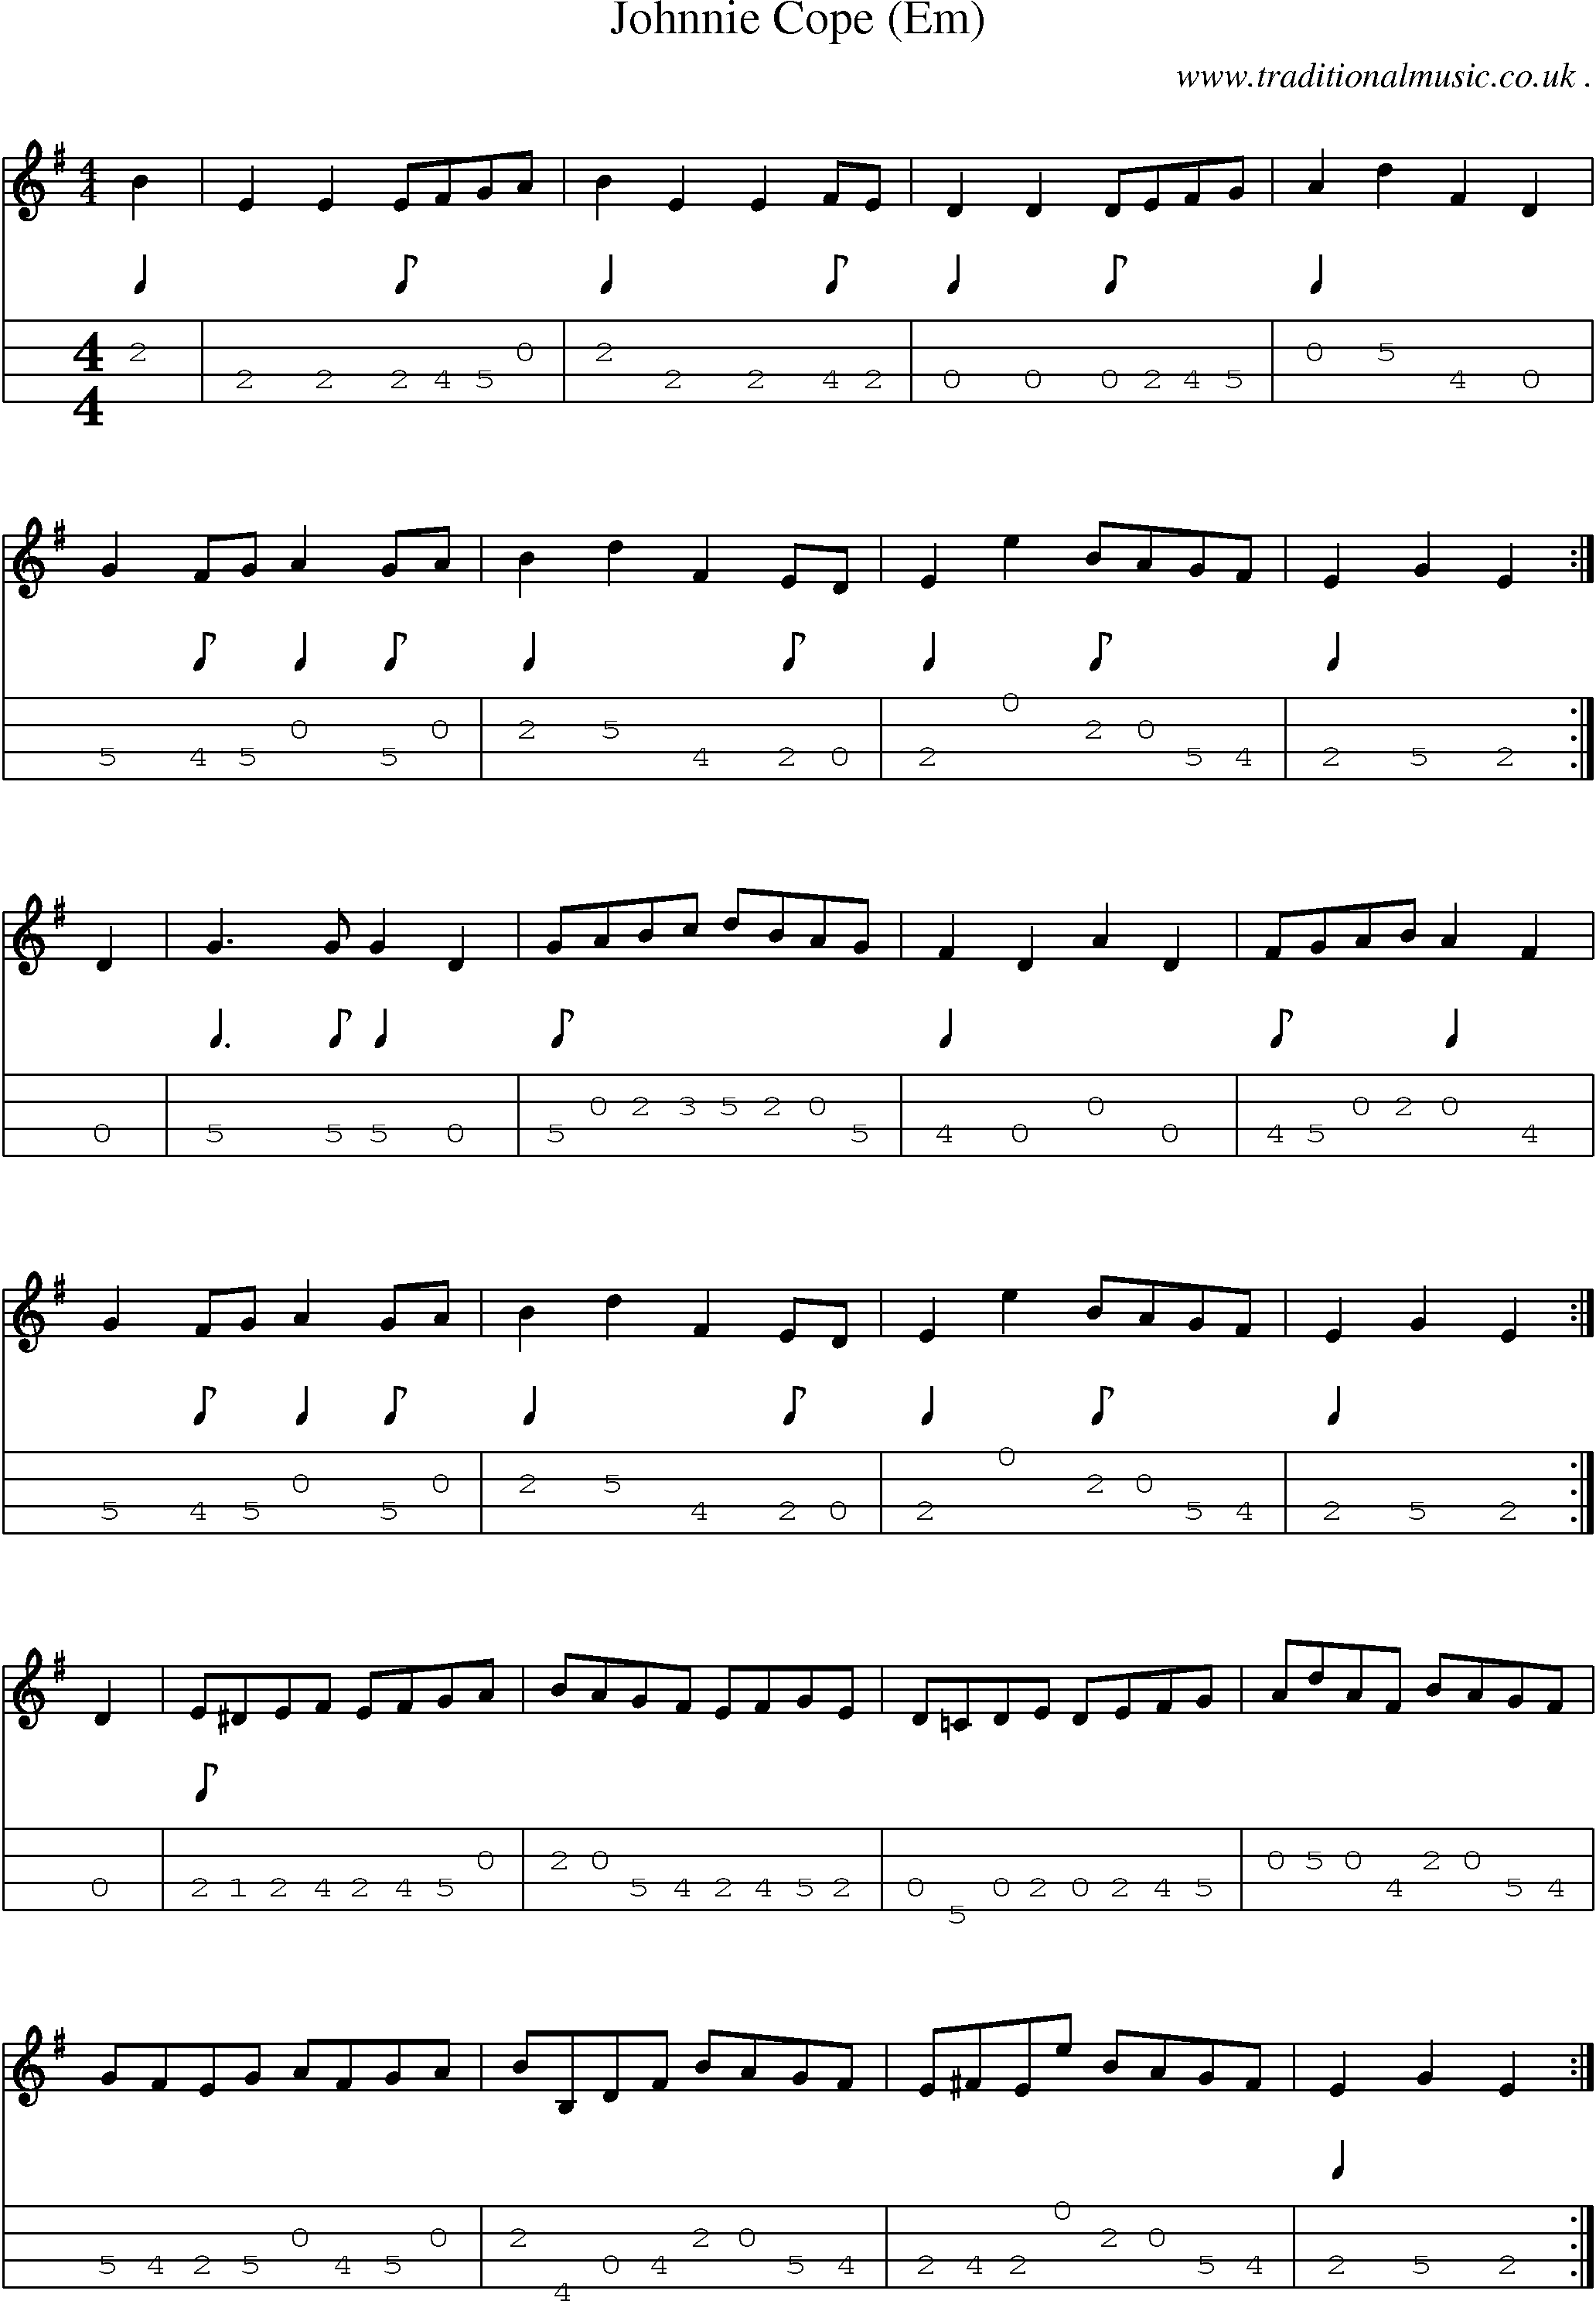 Sheet-music  score, Chords and Mandolin Tabs for Johnnie Cope Em